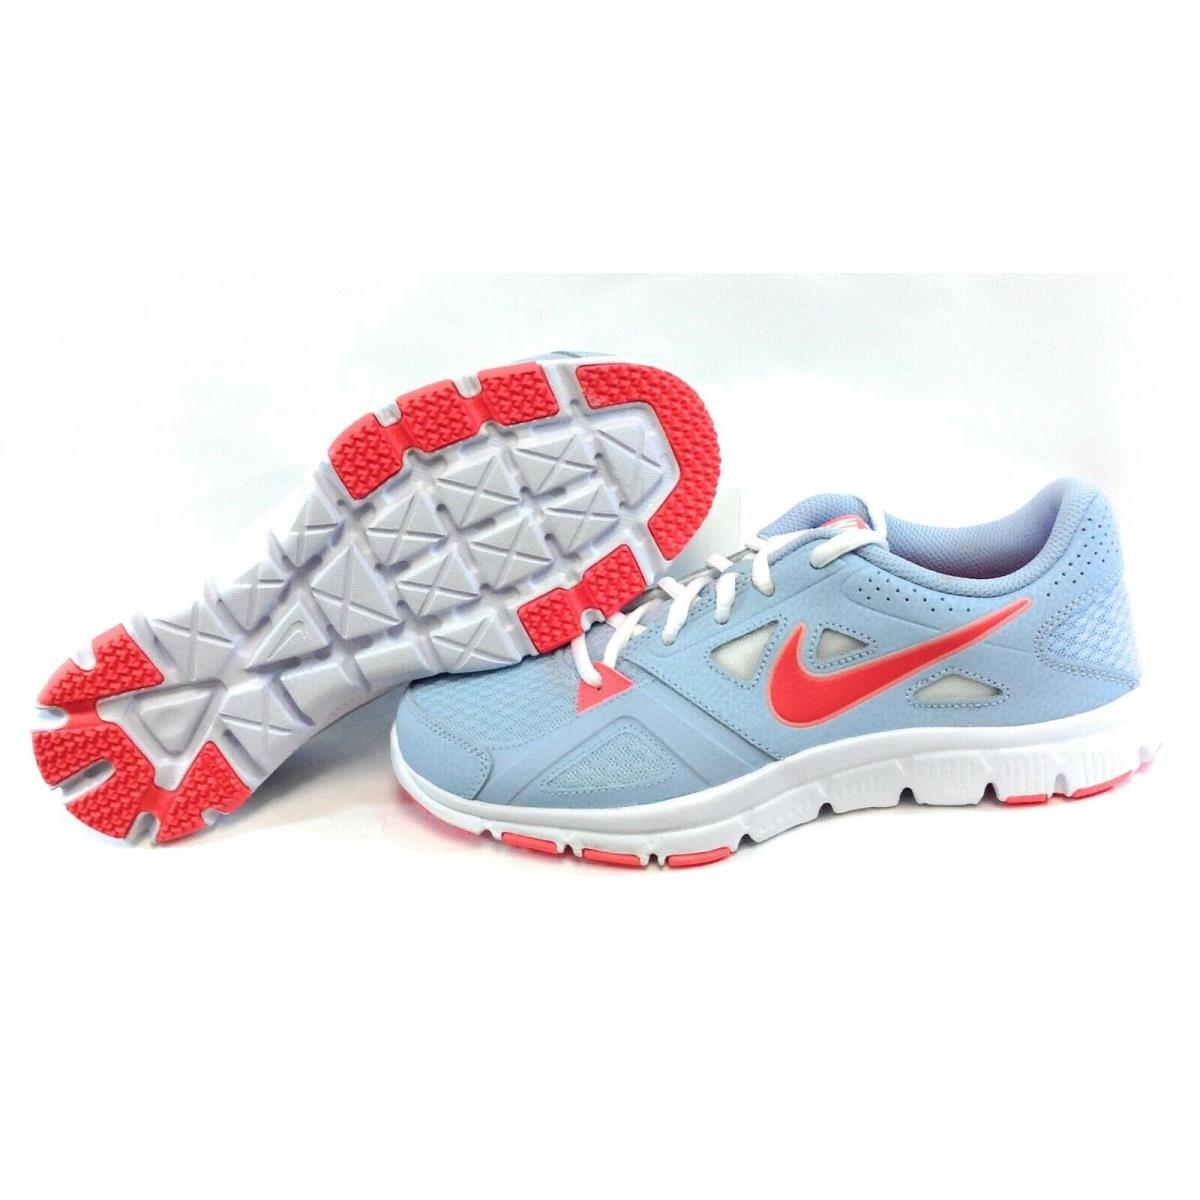 Girls Kids Youth Nike Flex Supreme Trainer 598873 400 2013 DS Sneakers Shoes